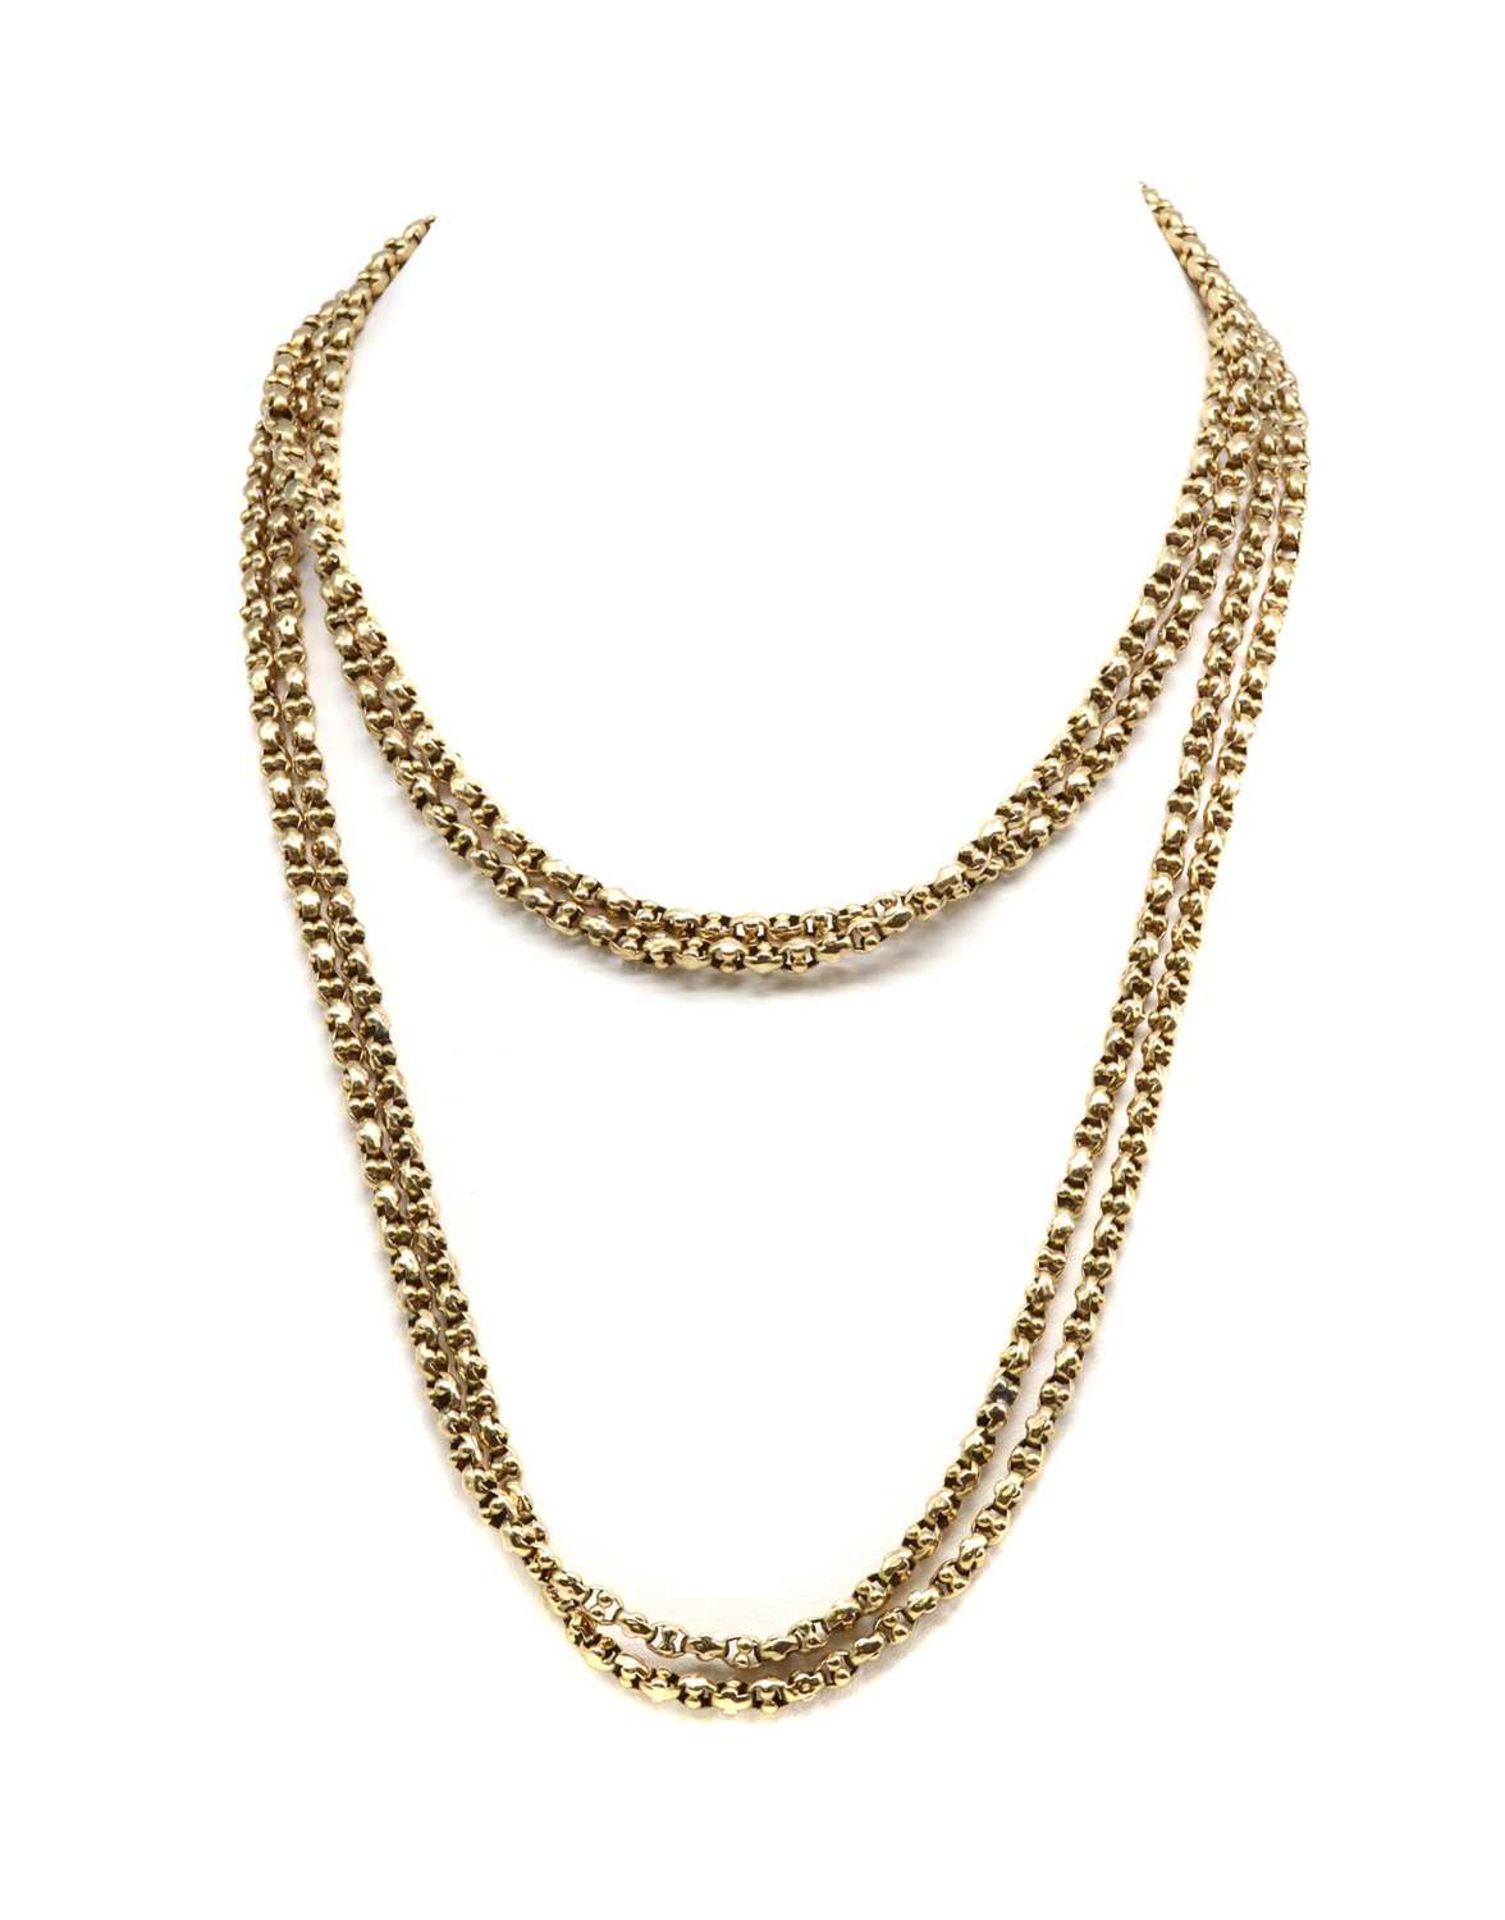 An early 20th century gold long chain,